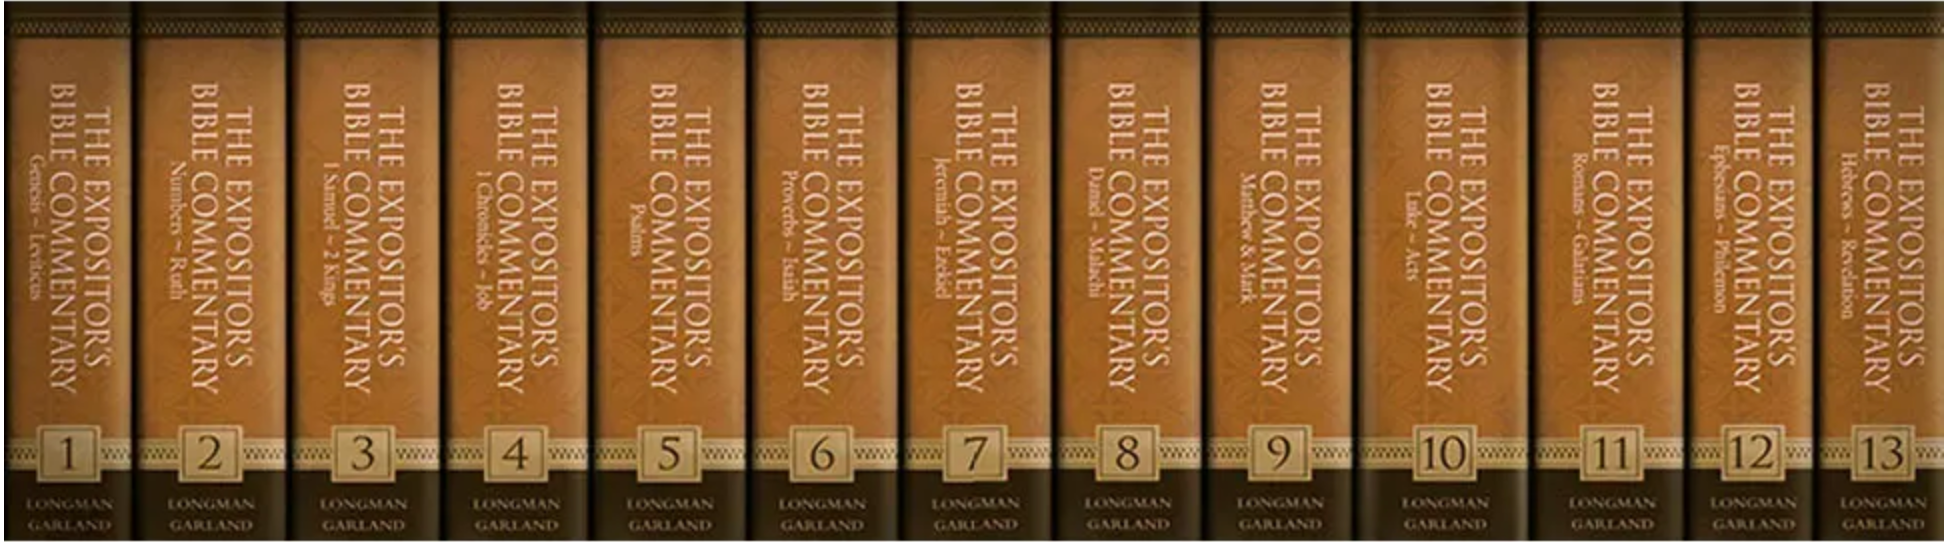 5 Reasons to add the Expositor’s Bible Commentary to your Library